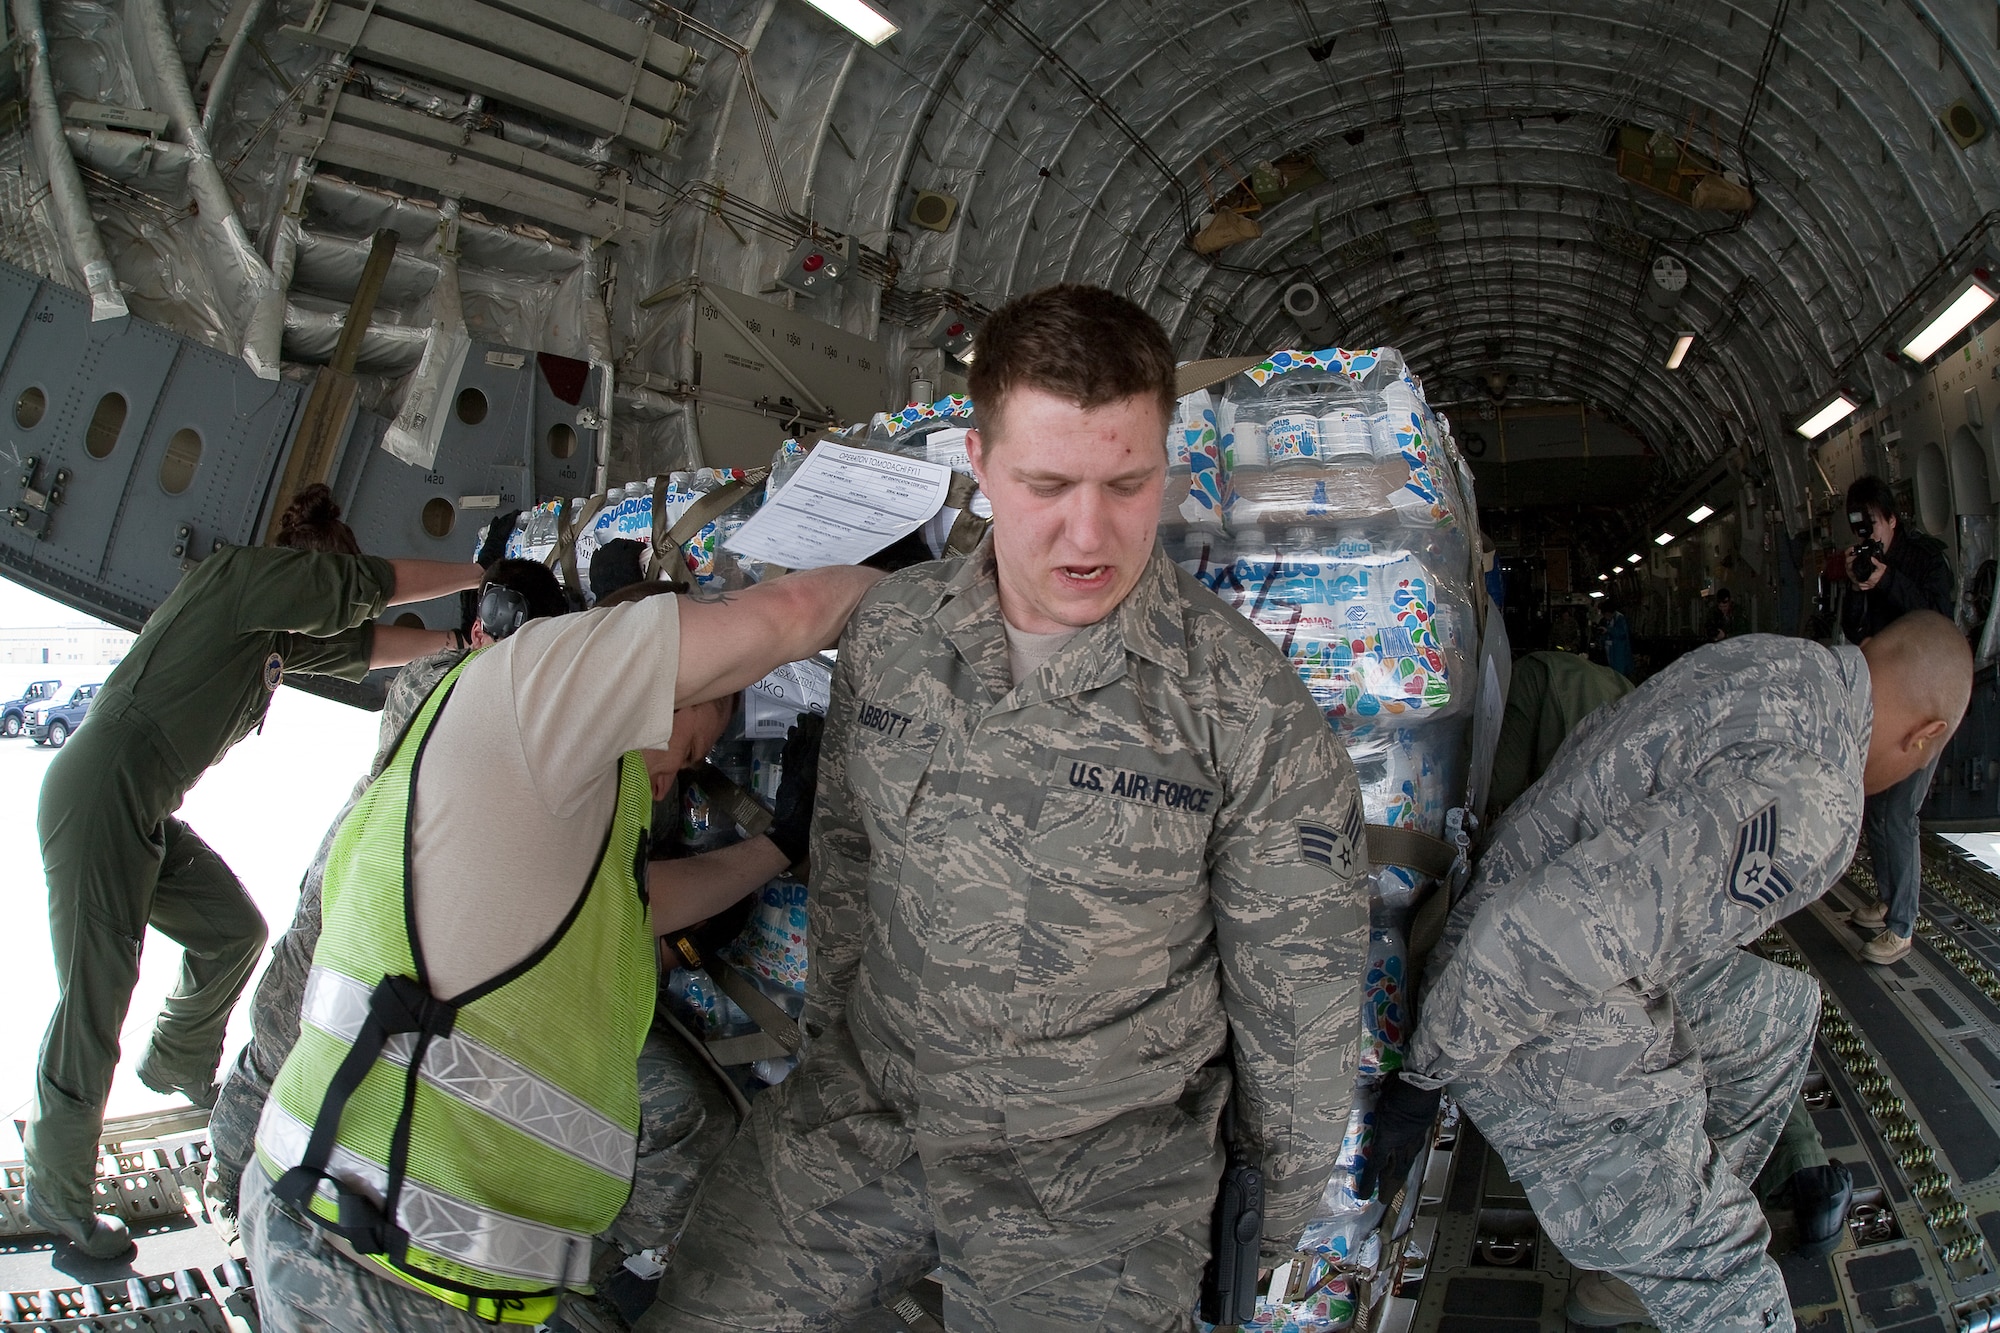 YOKOTA AIR BASE, Japan -- Senior Airman Nicholas Abbott (center), 730th Air Mobility Squadron, pushes a pallet of water bottles onto a C-17 Globalmaster III here March 20. The pallet was part of the the first humanitarian relief supplies being delivered to Sendai. (U.S. Air Force photo/Osakabe Yasuo)(Released)